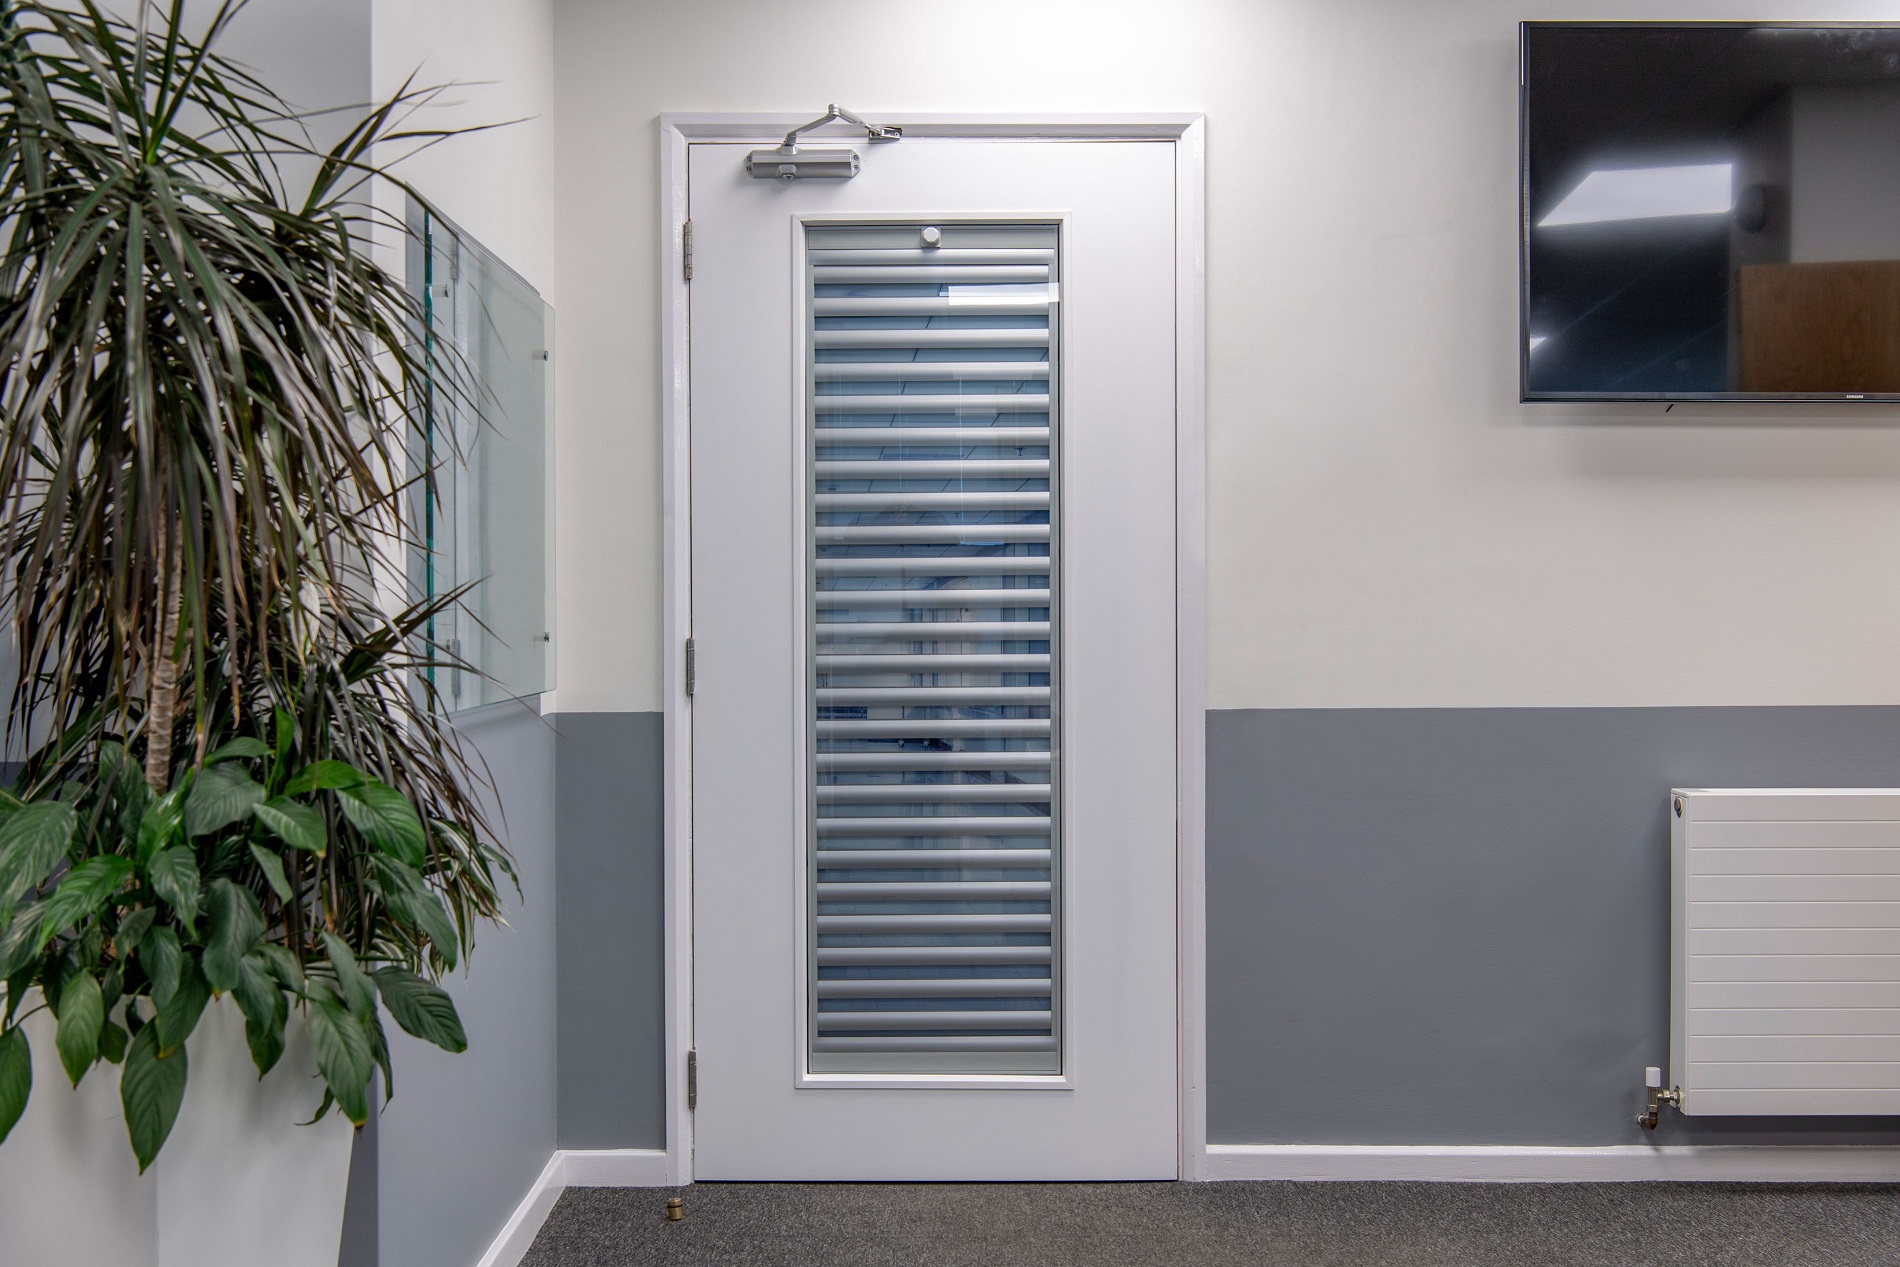 What is the best type of window blind for a hospital or healthcare building?